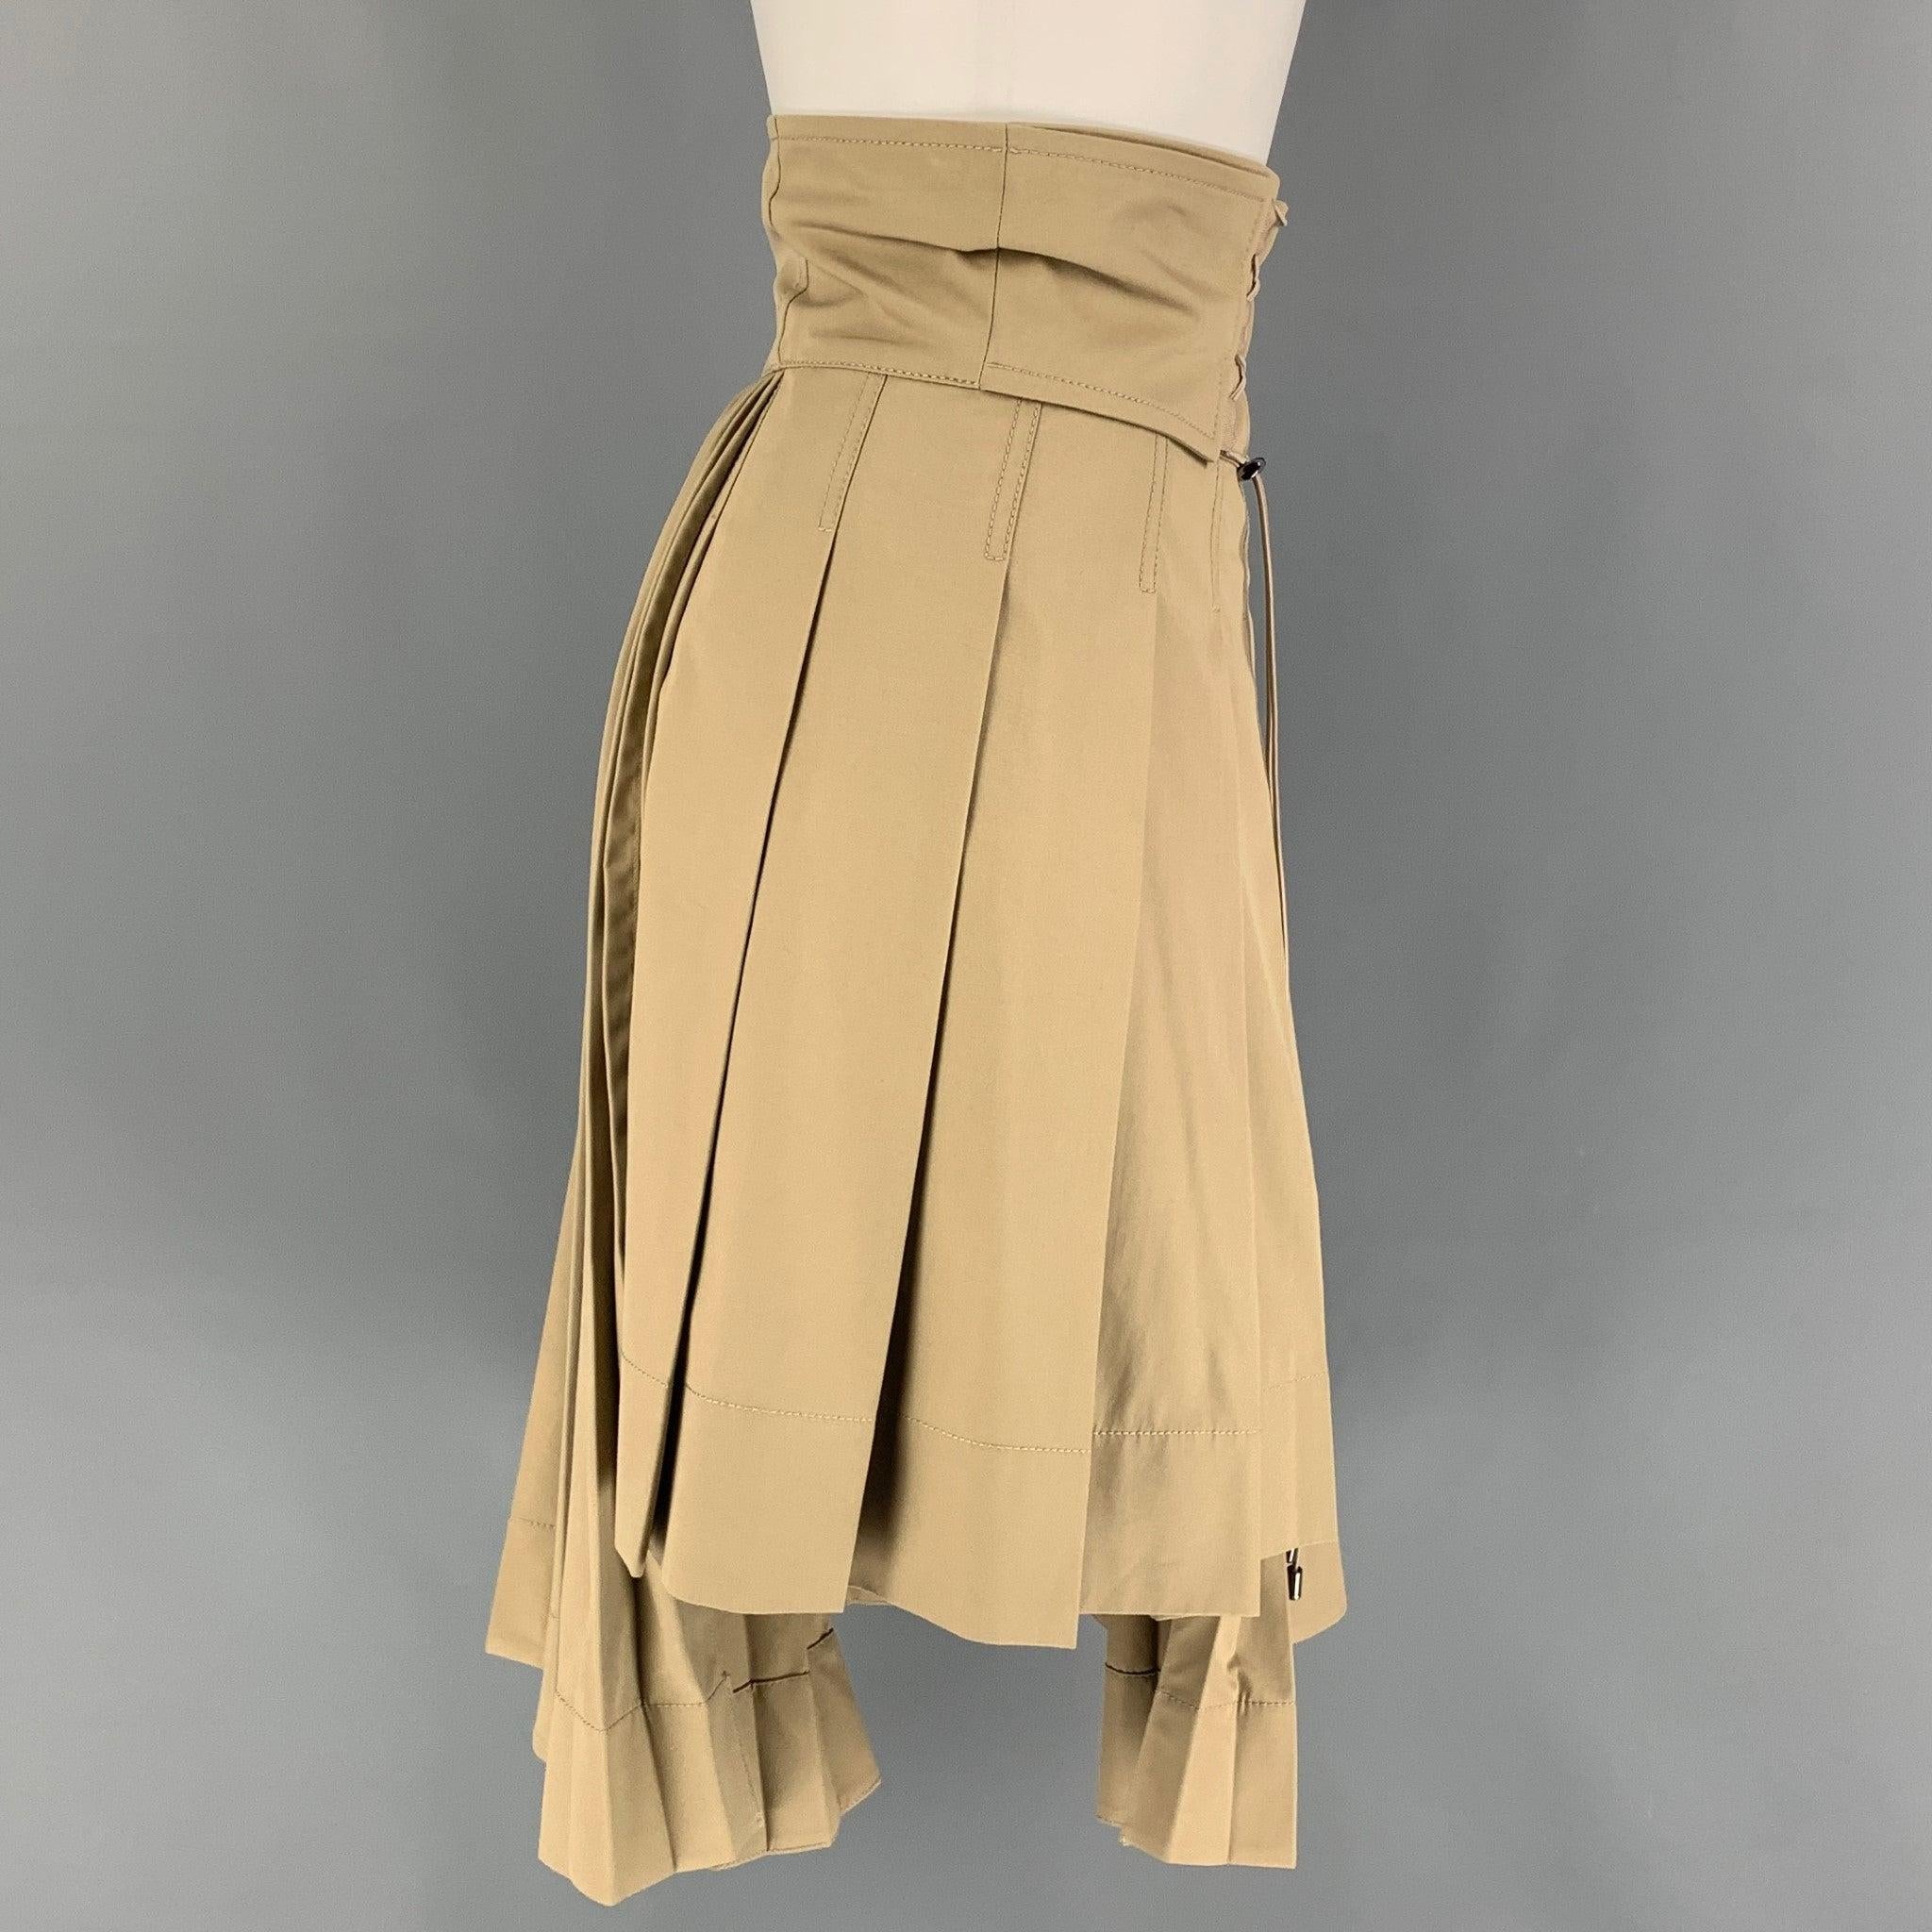 CHRISTIAN DIOR skirt comes in a khaki cotton gabardine featuring an asymmetrical style, high drawstring waist, wide waistband, and a side zipper closure. Made in Italy. New With Tags.
 

Marked:   4 

Measurements: 
  Waist: 26 inches  Hip: 32